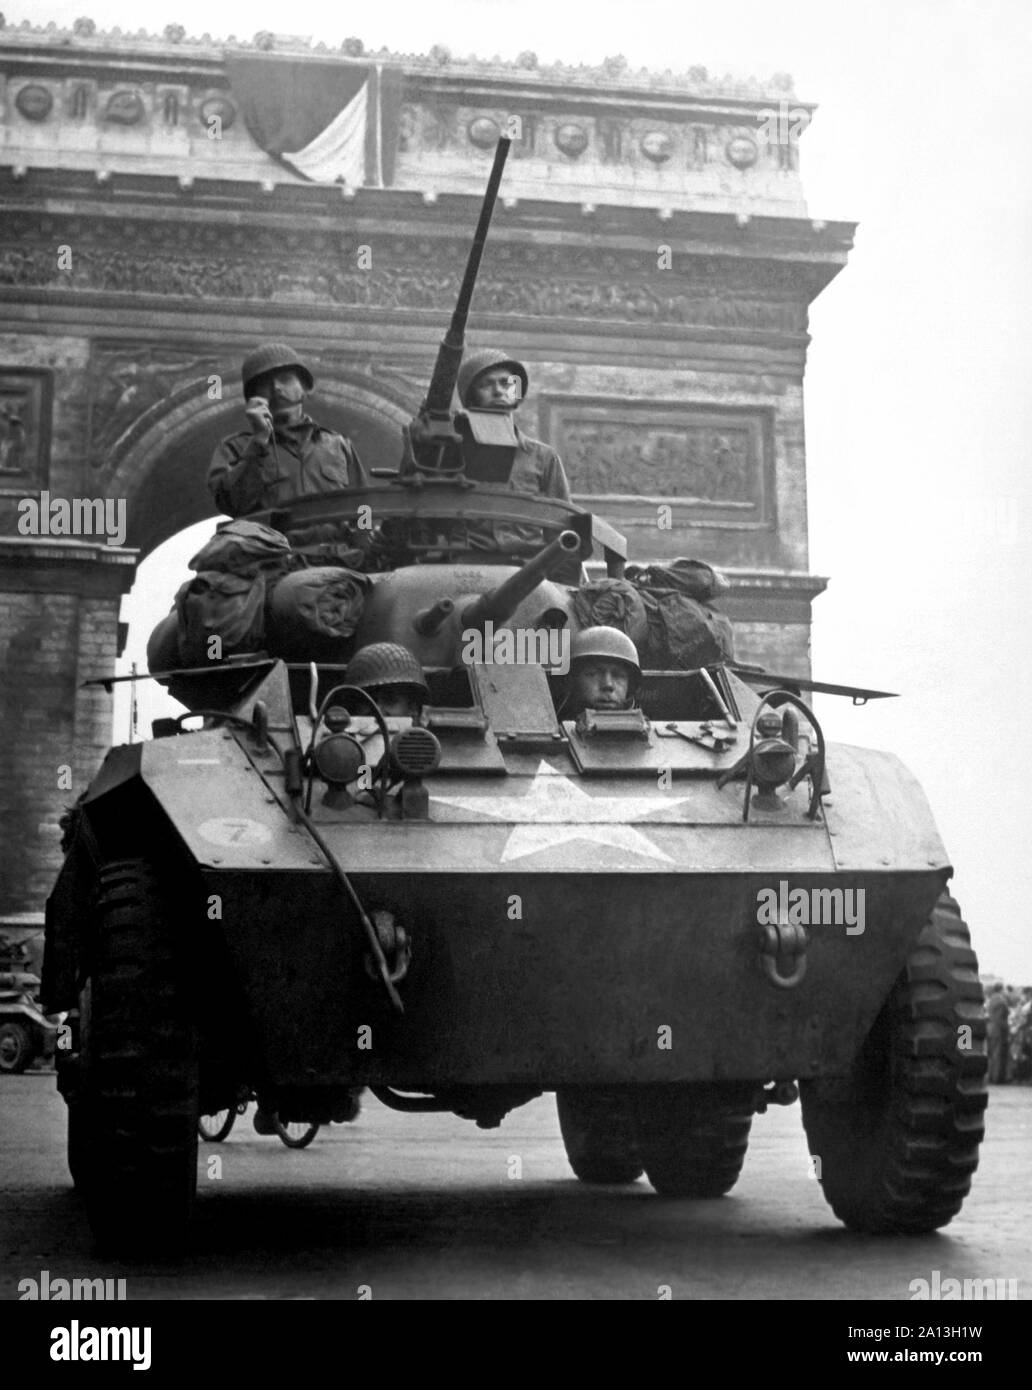 World War II American M-8 light armored car, rolling past the Arc de Triomphe in Paris. Stock Photo